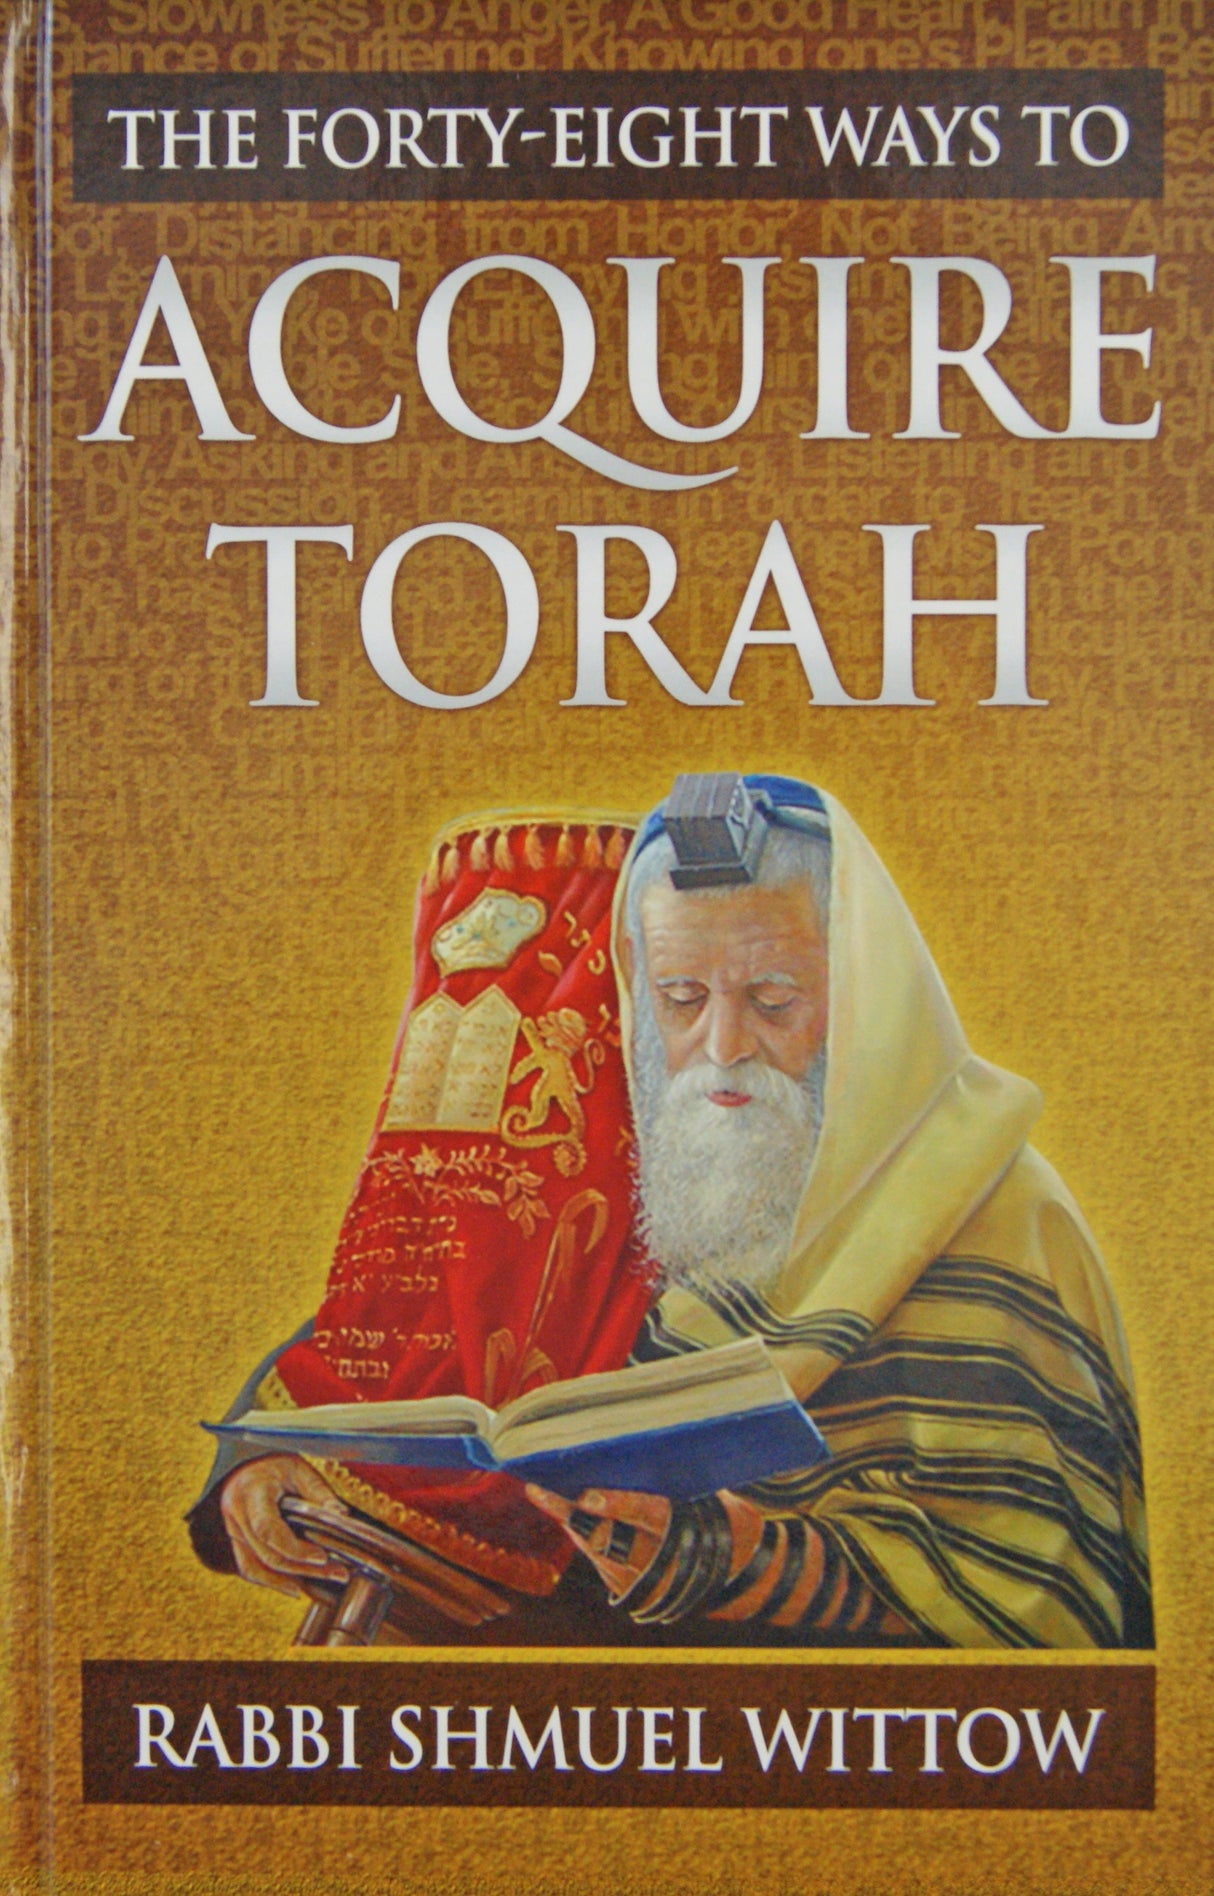 The Forty-Eight Ways To Acquire Torah